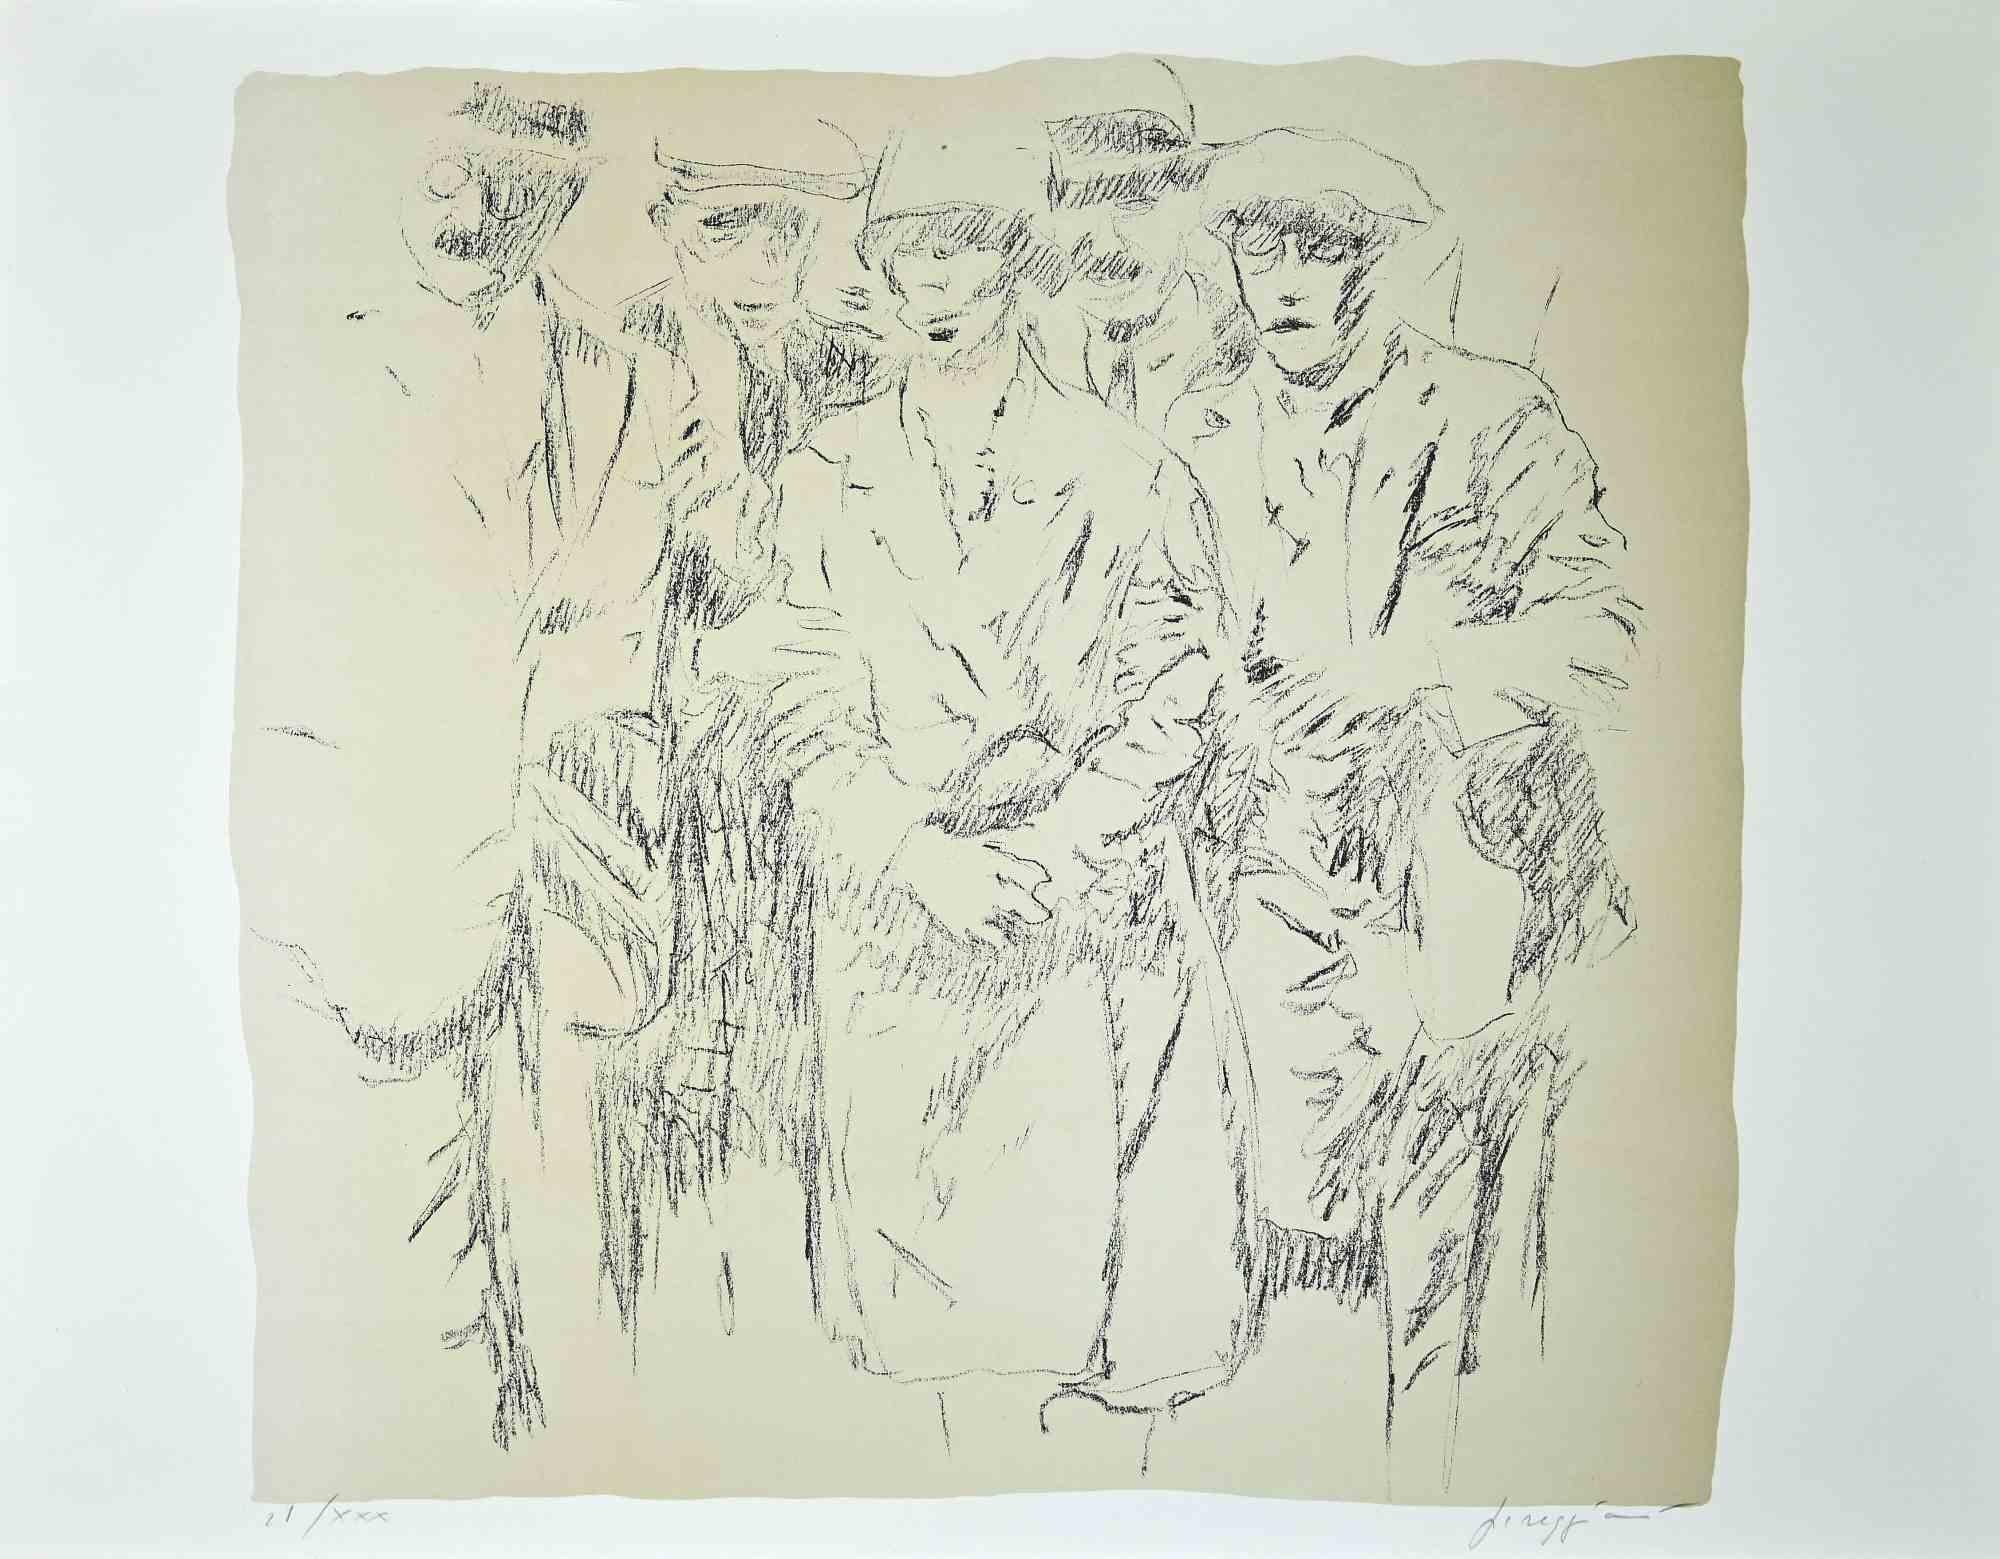 Behind the boss is a Contemporary Artwork realized by the Italian artist Pino Reggiani (Forlì, 1937).

Lithograph on paper.

Hand-signed in pencil by the artist on the lower right corner: Reggiani. Numbered in pencil on the lower left corner in